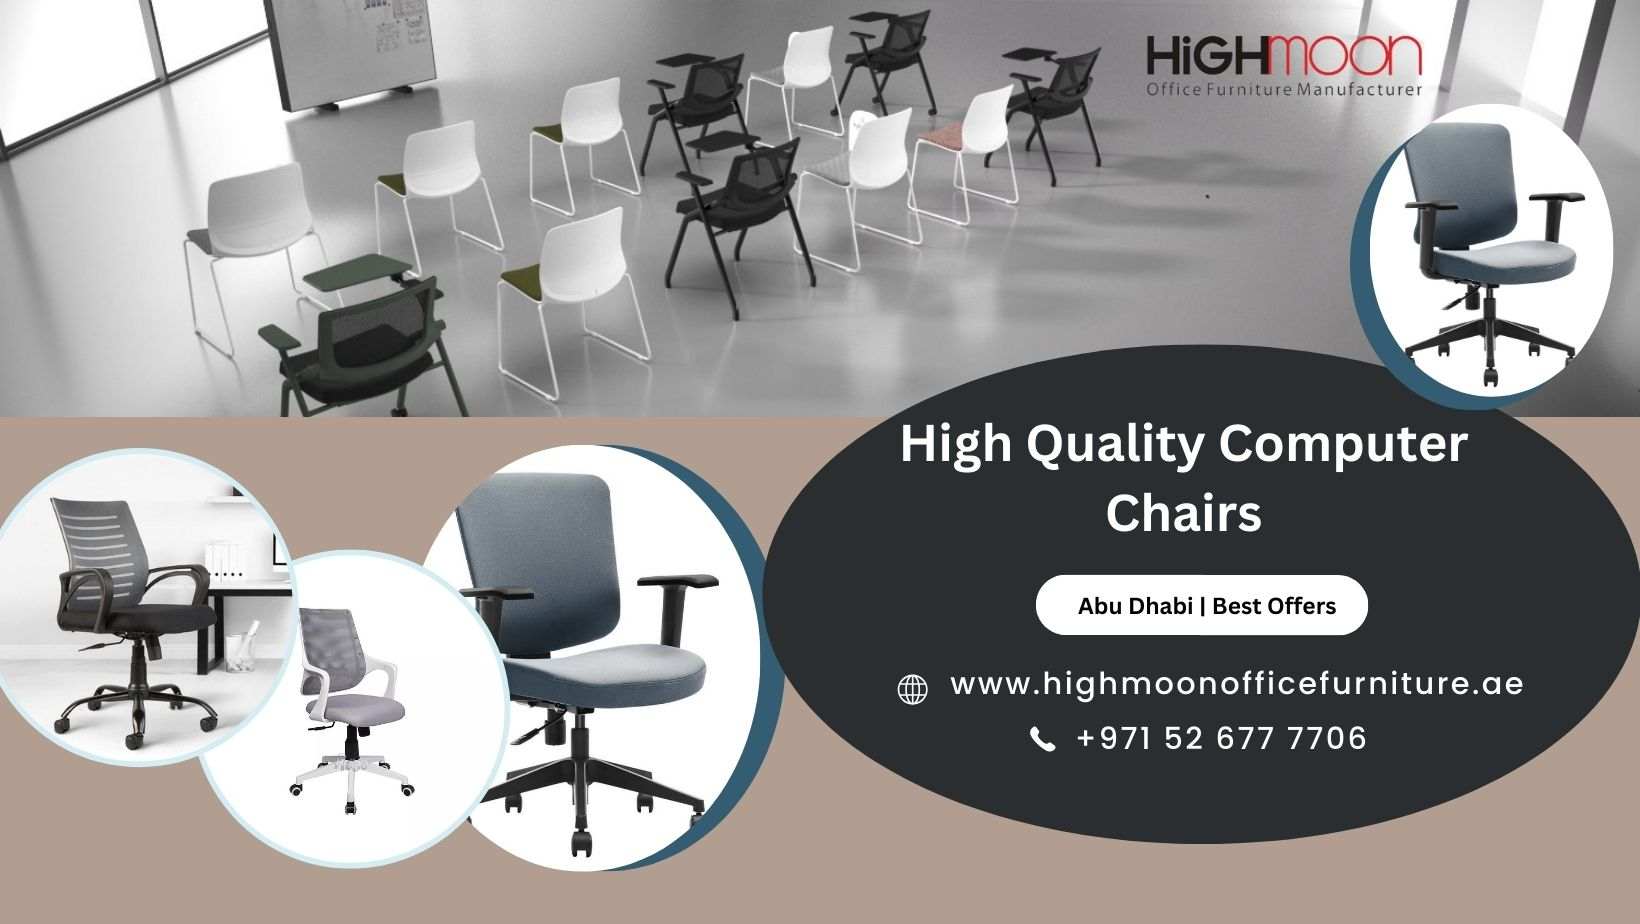 High Quality Computer Chairs for Sale in Abu Dhabi Best Offers